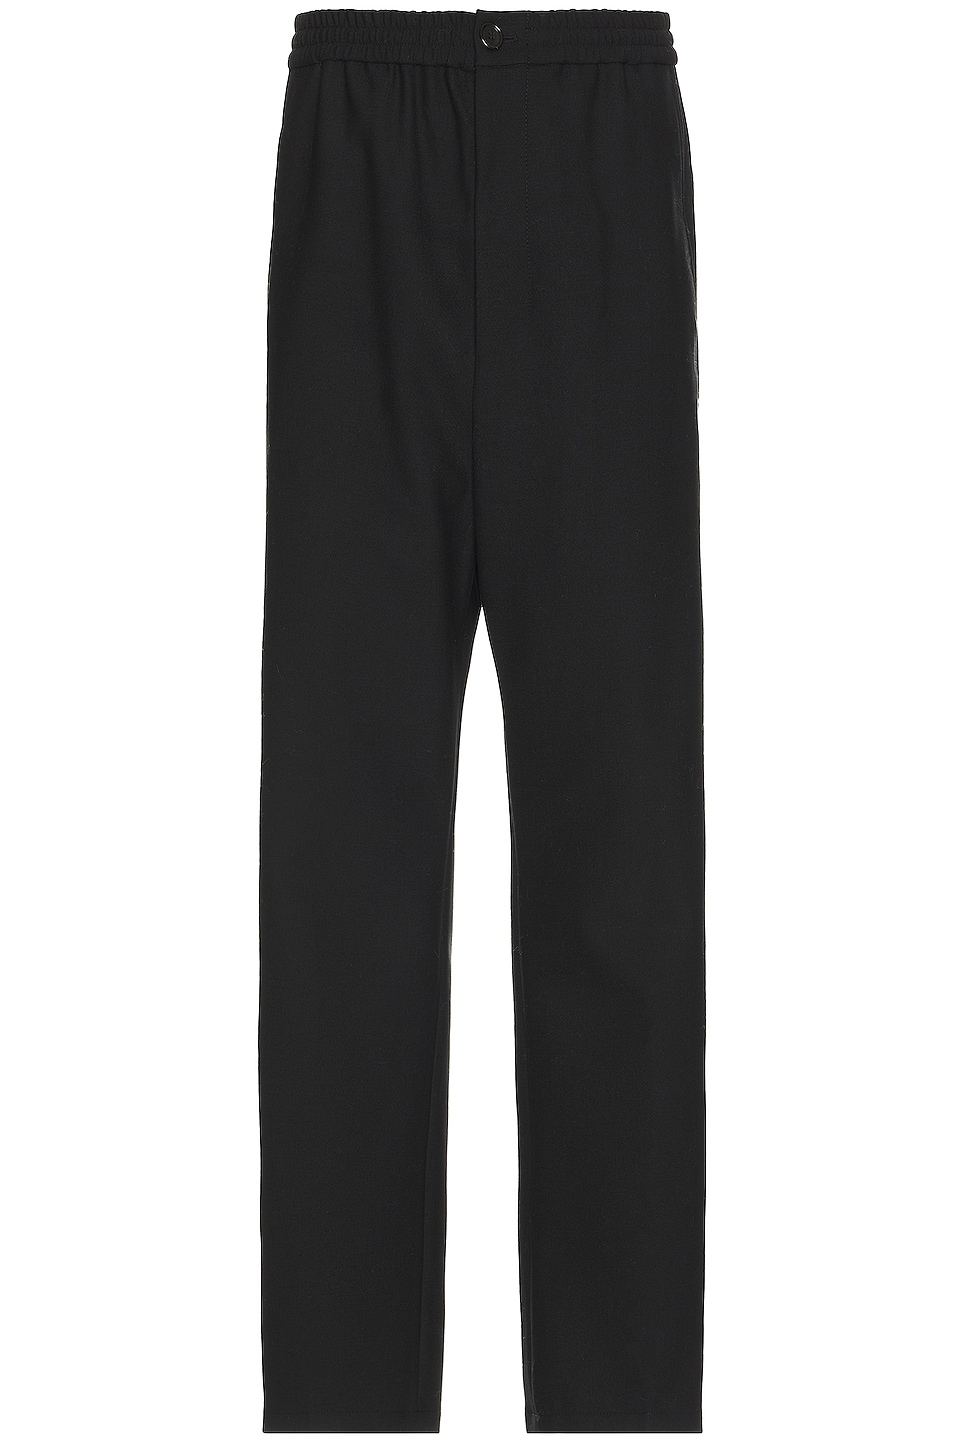 Image 1 of Our Legacy Sailor Trouser in Black Experienced